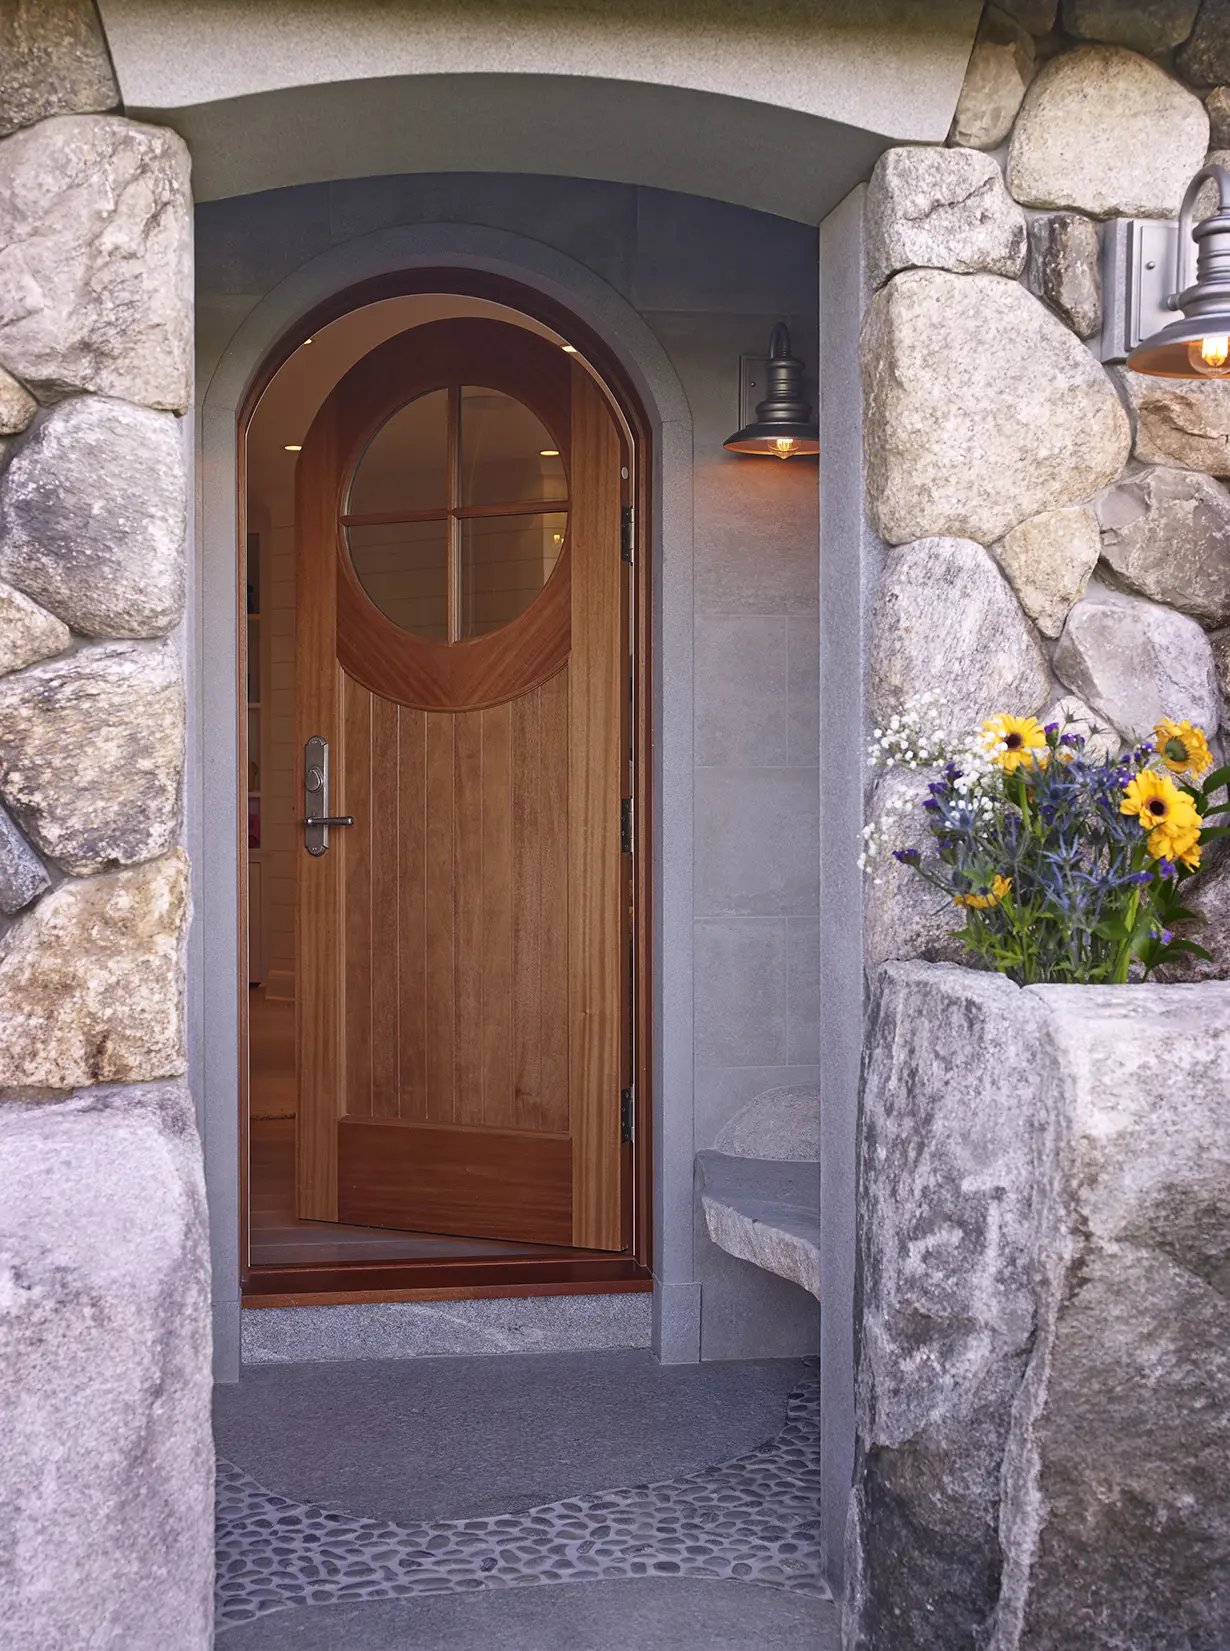 View from entryway of rounded doorway with custom circular window